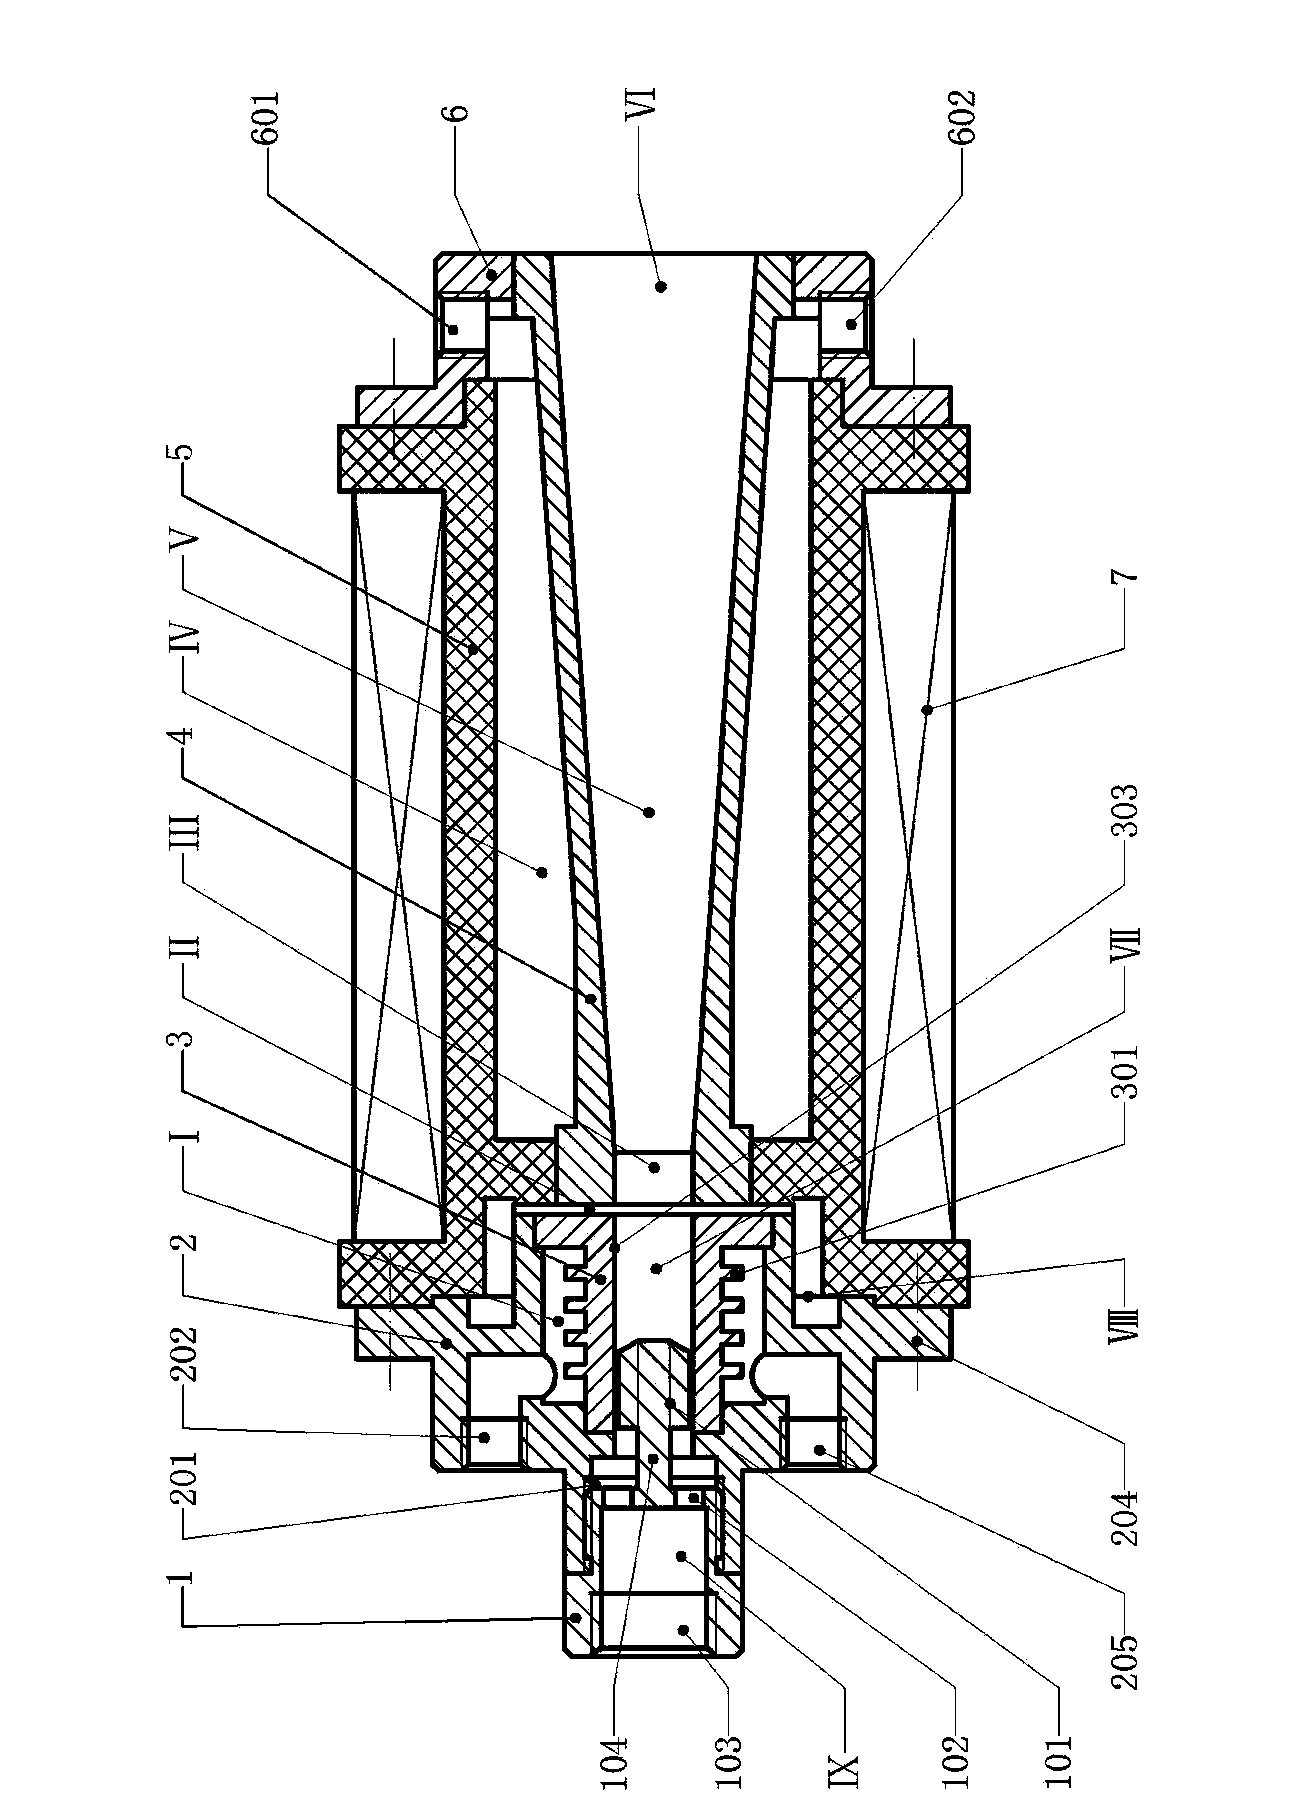 Revolved body cathode with cooling rib rings